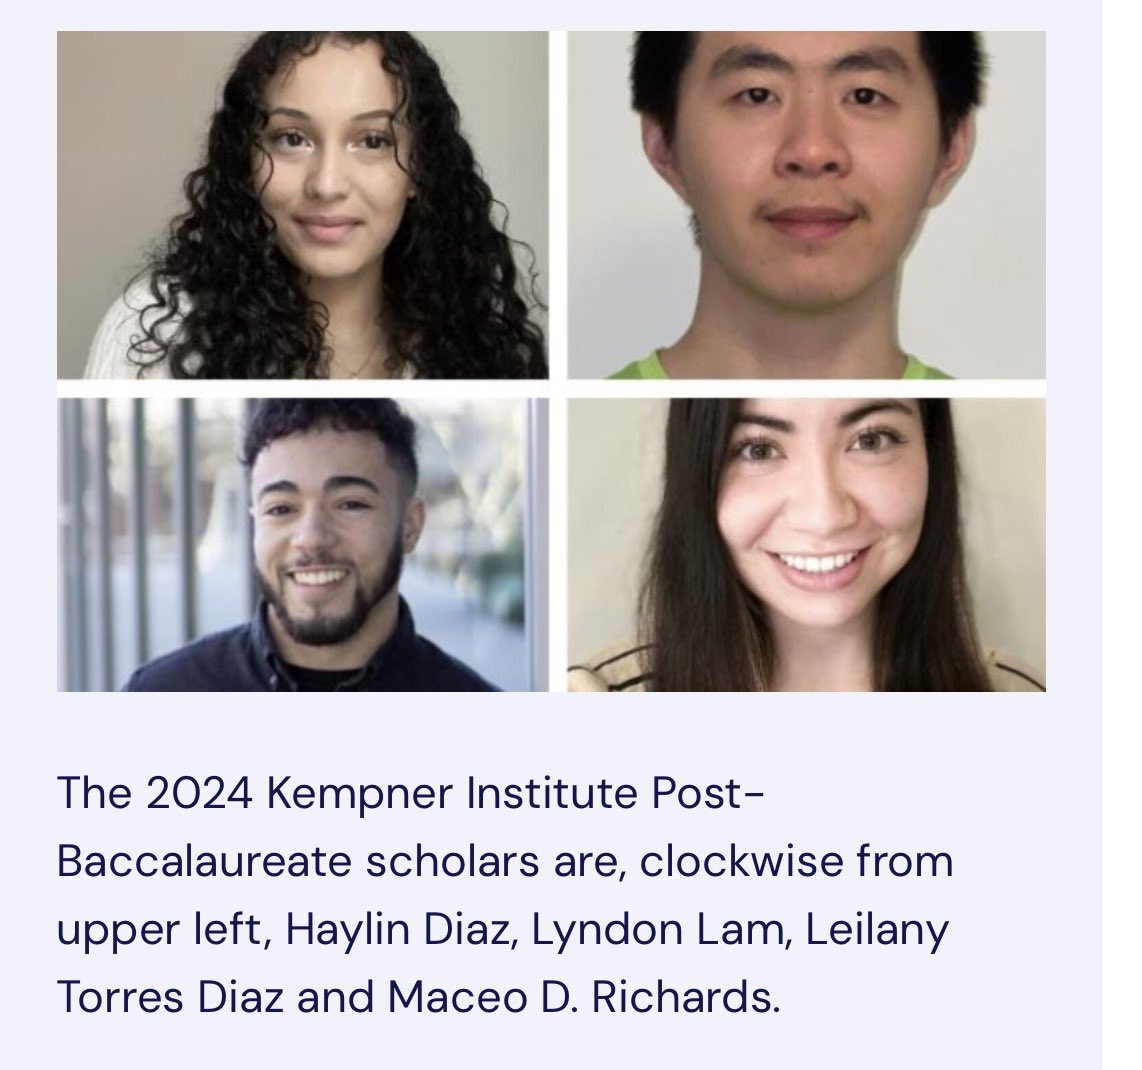 We’re thrilled to announce #KempnerInstitute’s first cohort of post-bac scholars! These 4 recent college grads will undertake extensive mentored research & coursework with 2 years of funding & professional development. Read more: bit.ly/3KhCJ9x @harvardGSAS #AI #NeuroAI